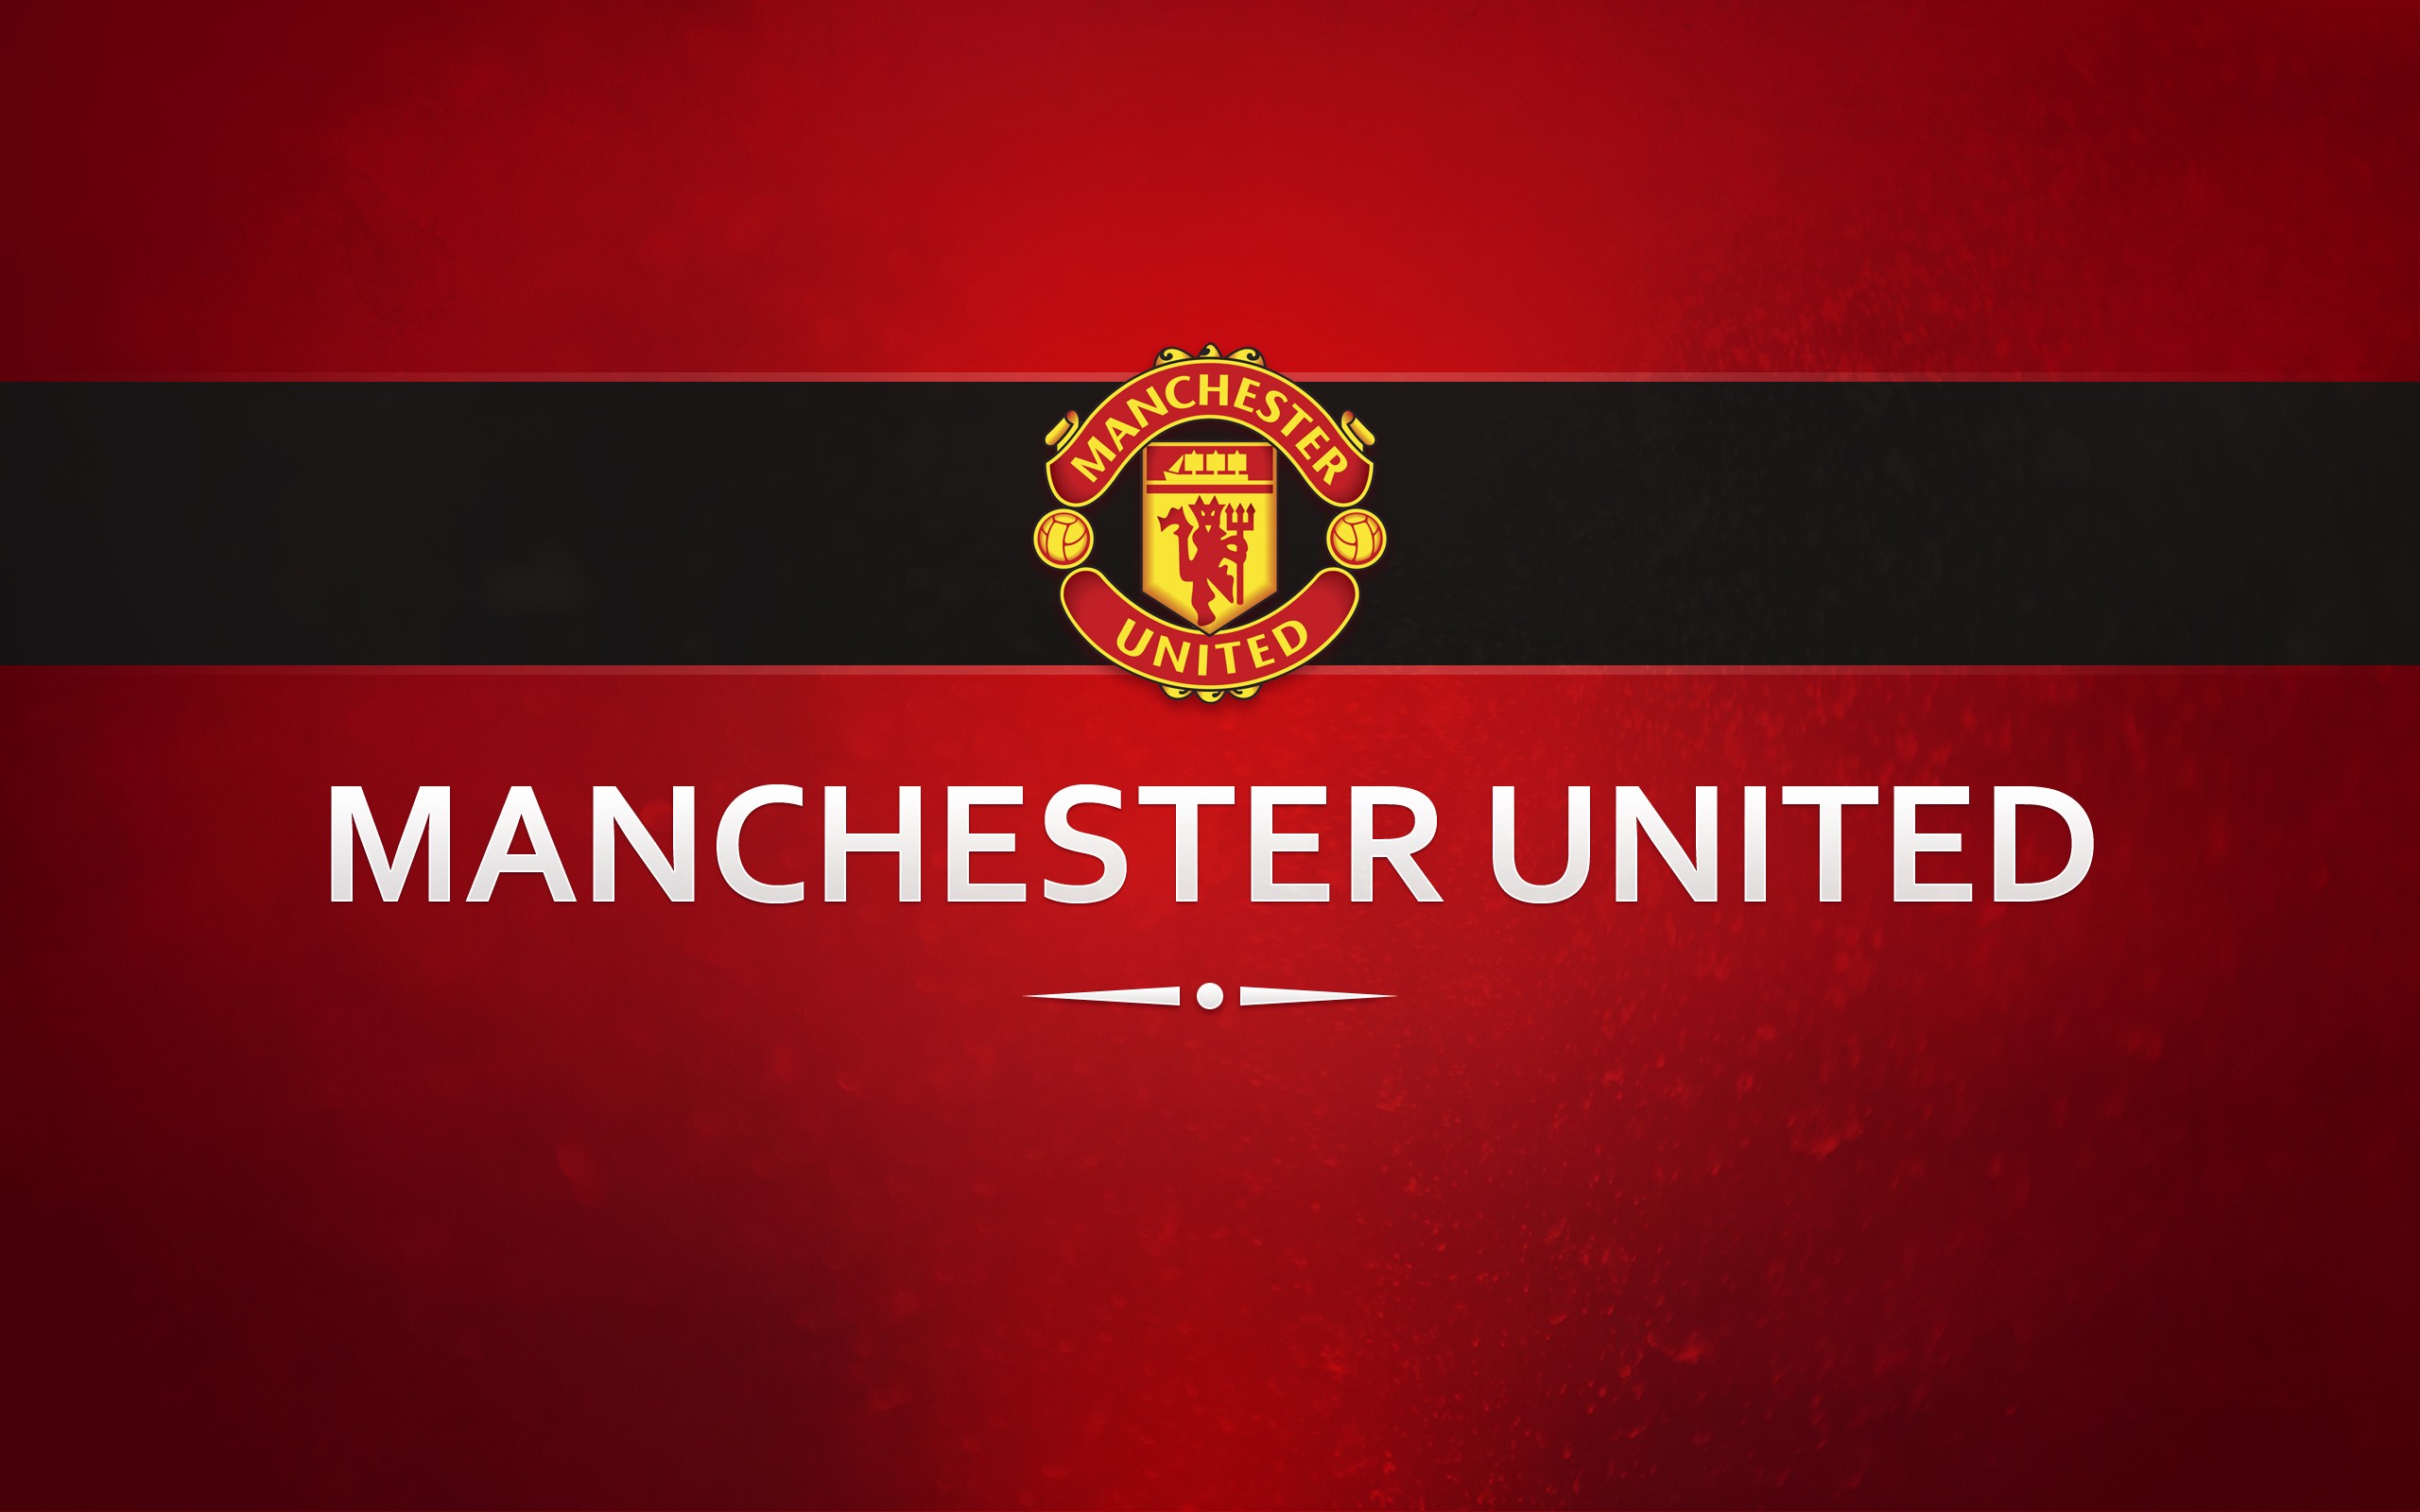 Manchester United, Soccer Clubs, Premier League, Typography Wallpapers